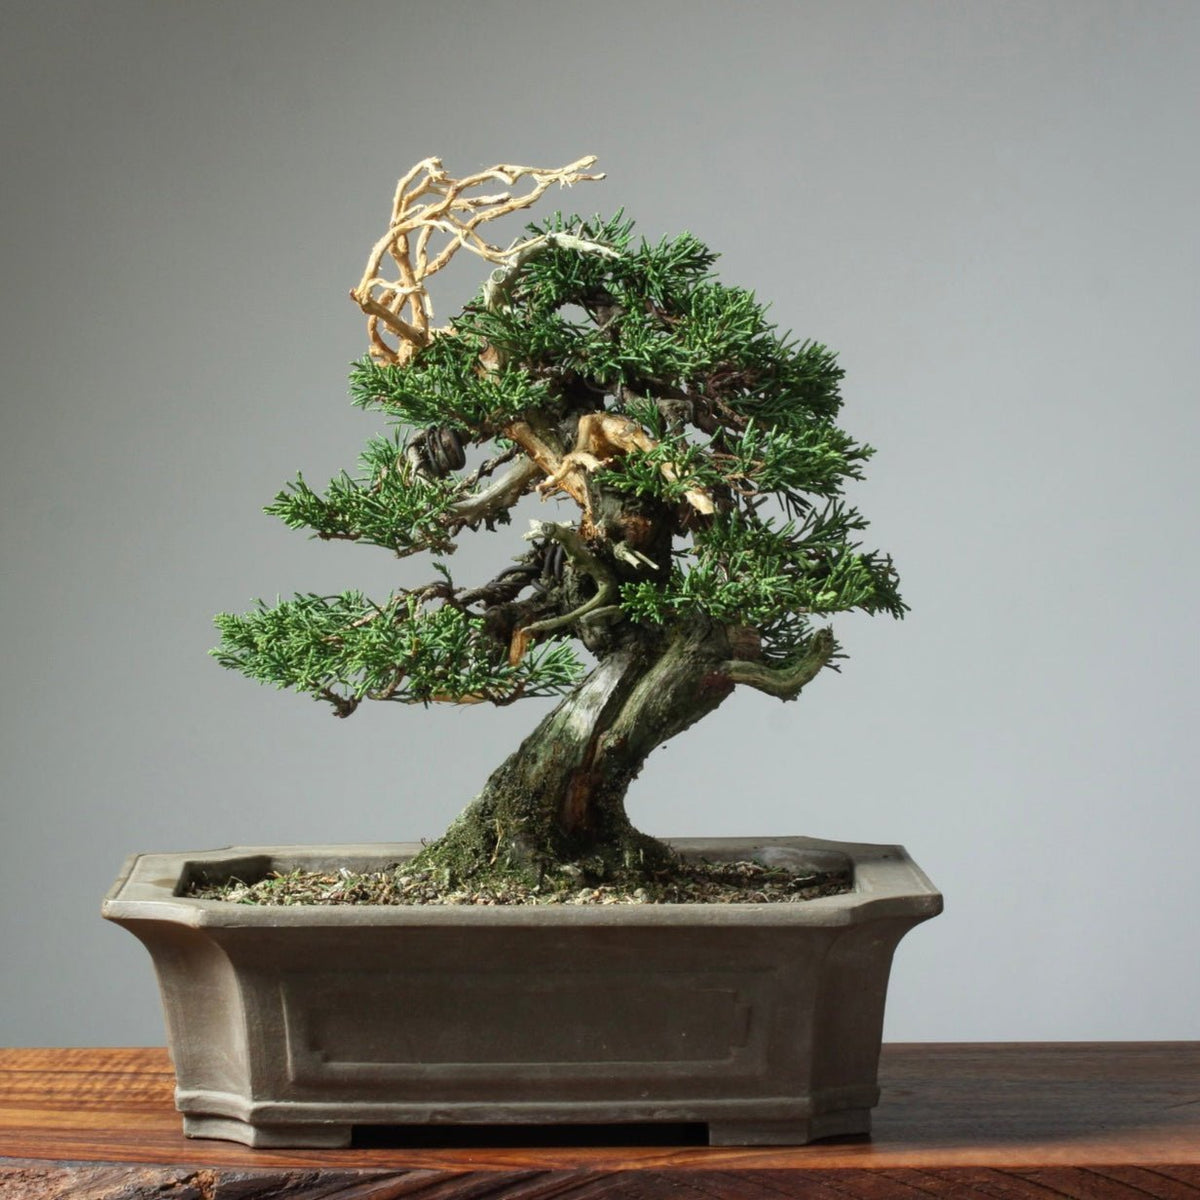 Bonsai Tools Explained : Types and Uses for working with your